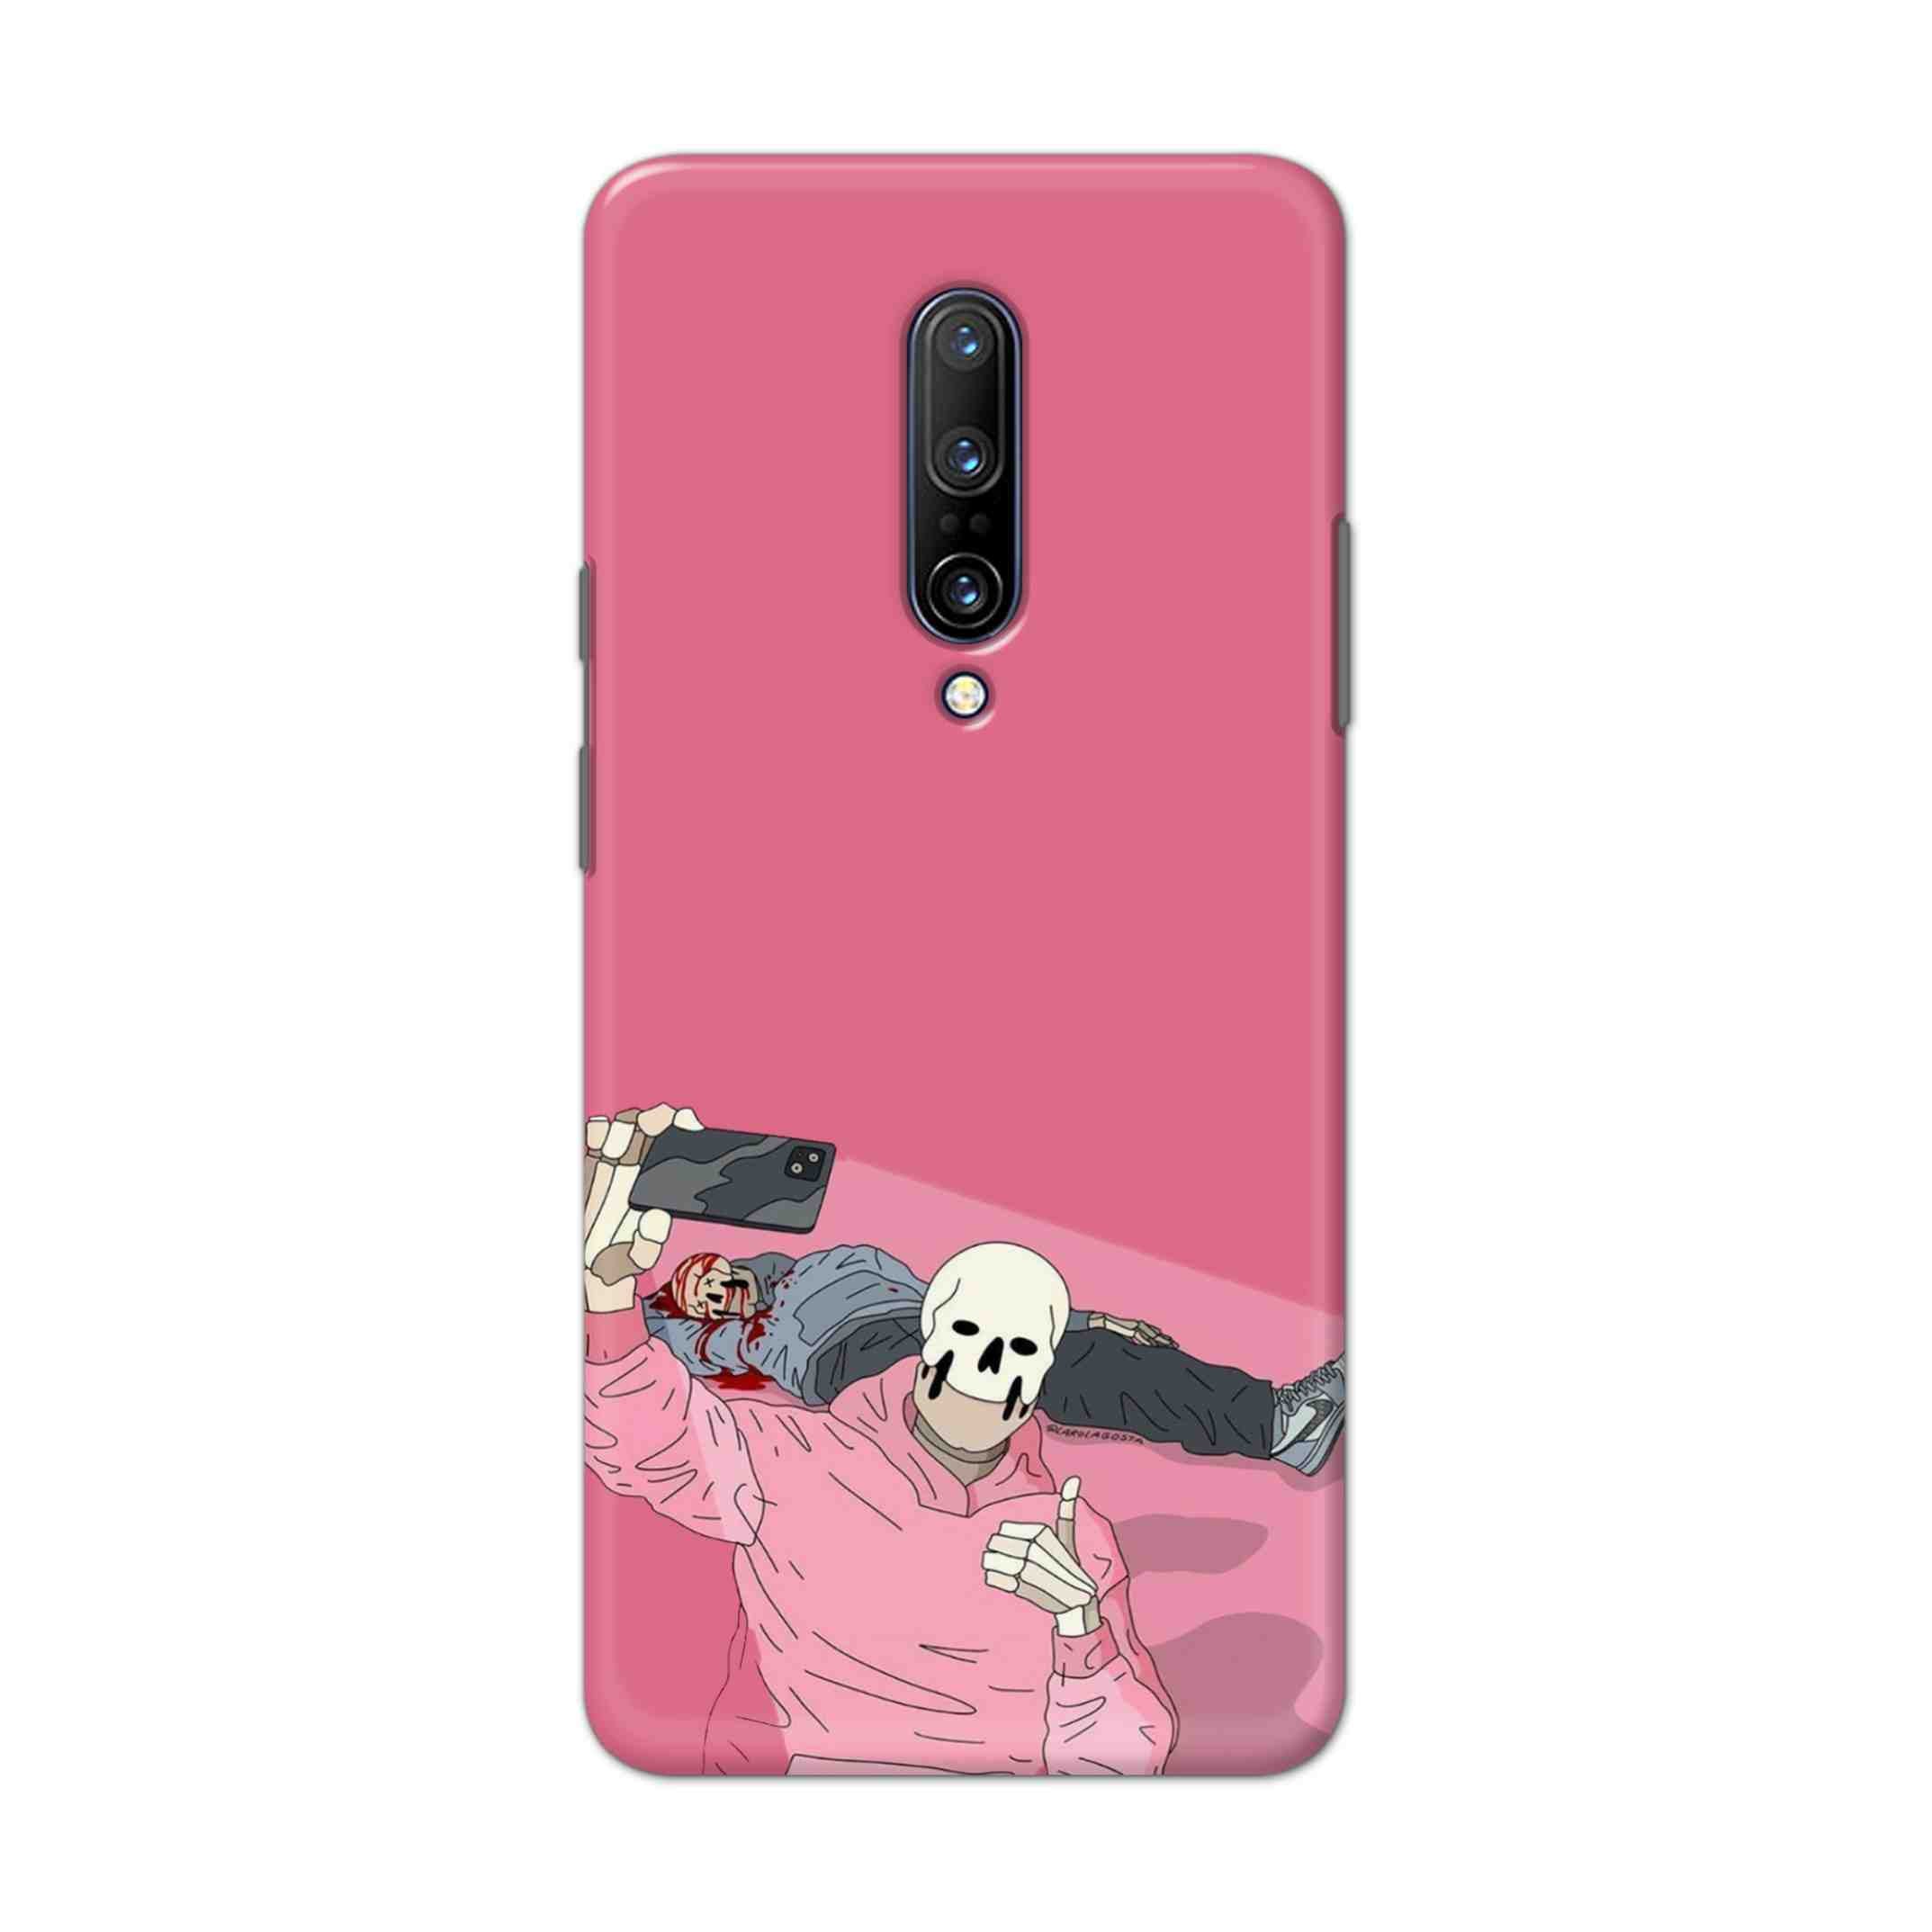 Buy Selfie Hard Back Mobile Phone Case Cover For OnePlus 7 Pro Online